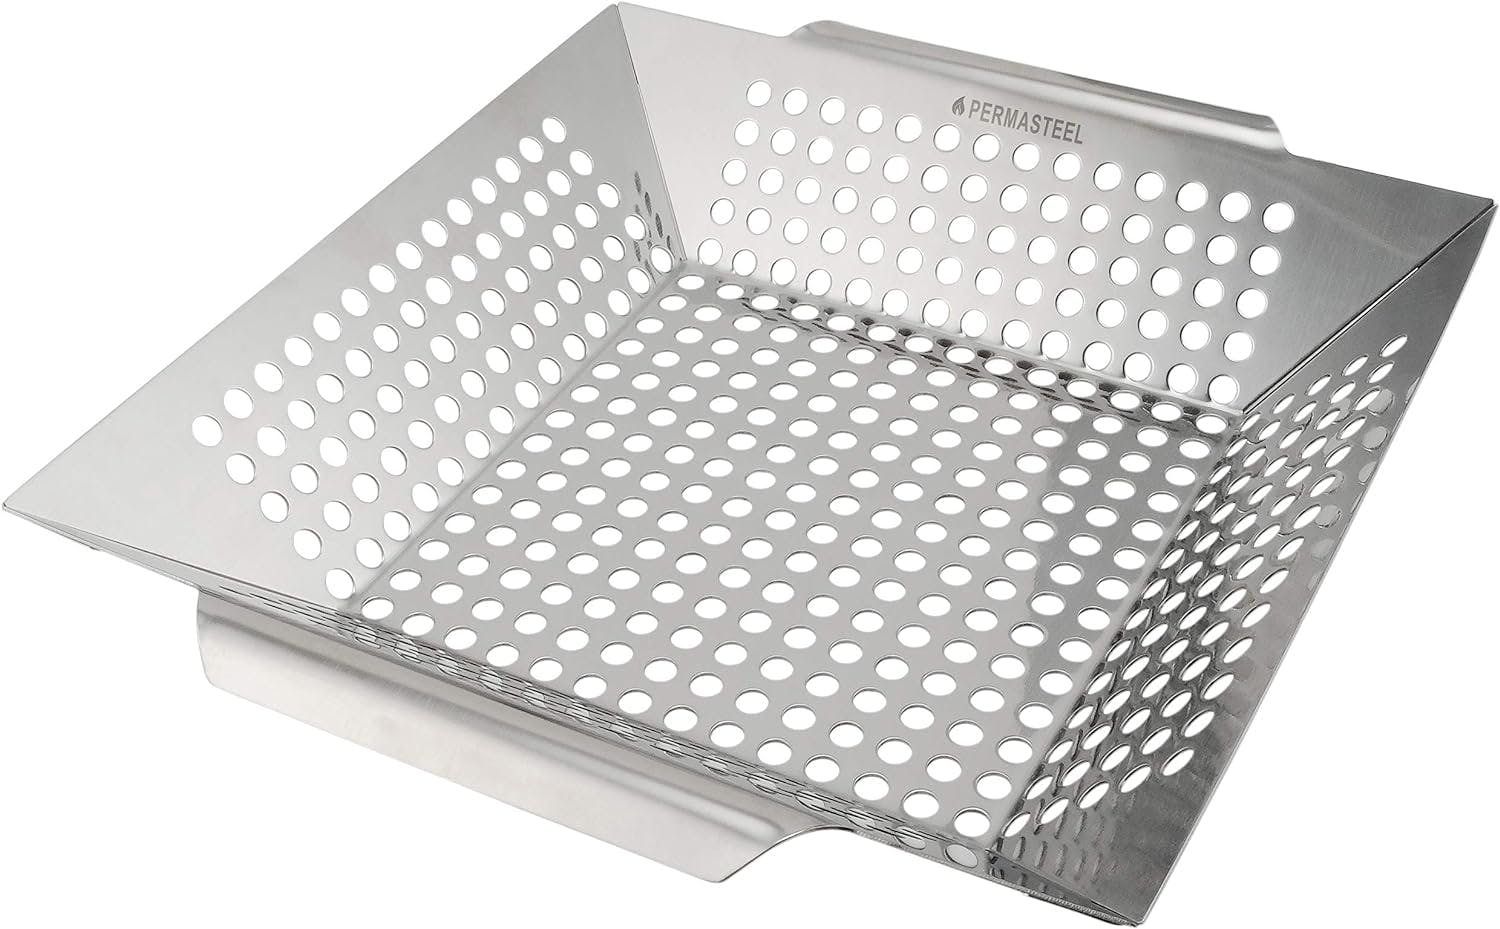 12" Square Stainless Steel Heavy Duty Grilling Basket